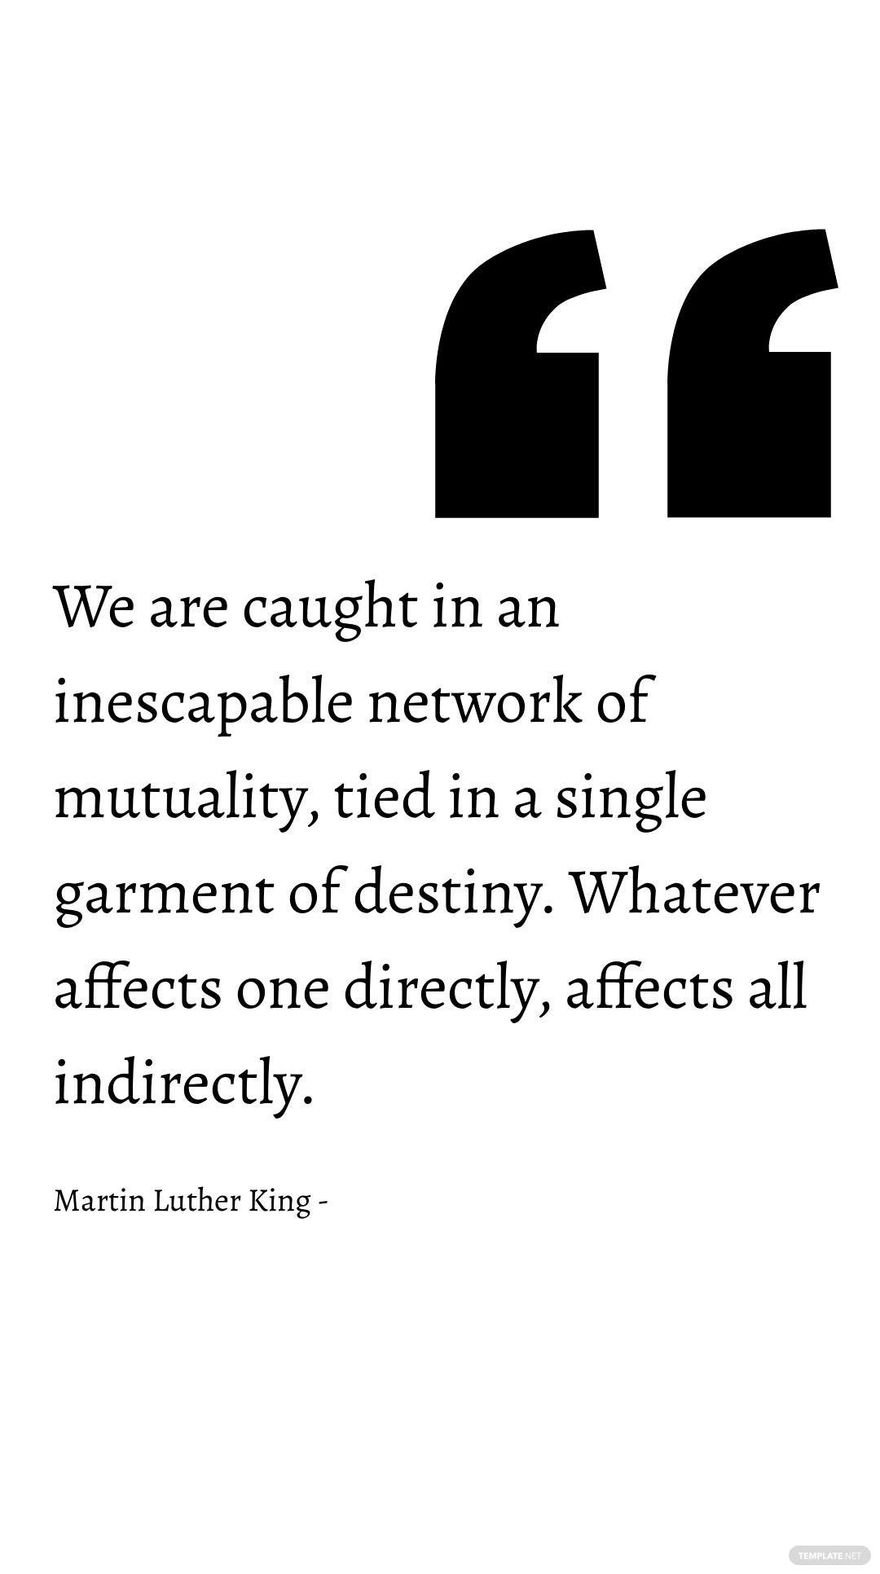 Free Martin Luther King - We are caught in an inescapable network of mutuality, tied in a single garment of destiny. Whatever affects one directly, affects all indirectly.